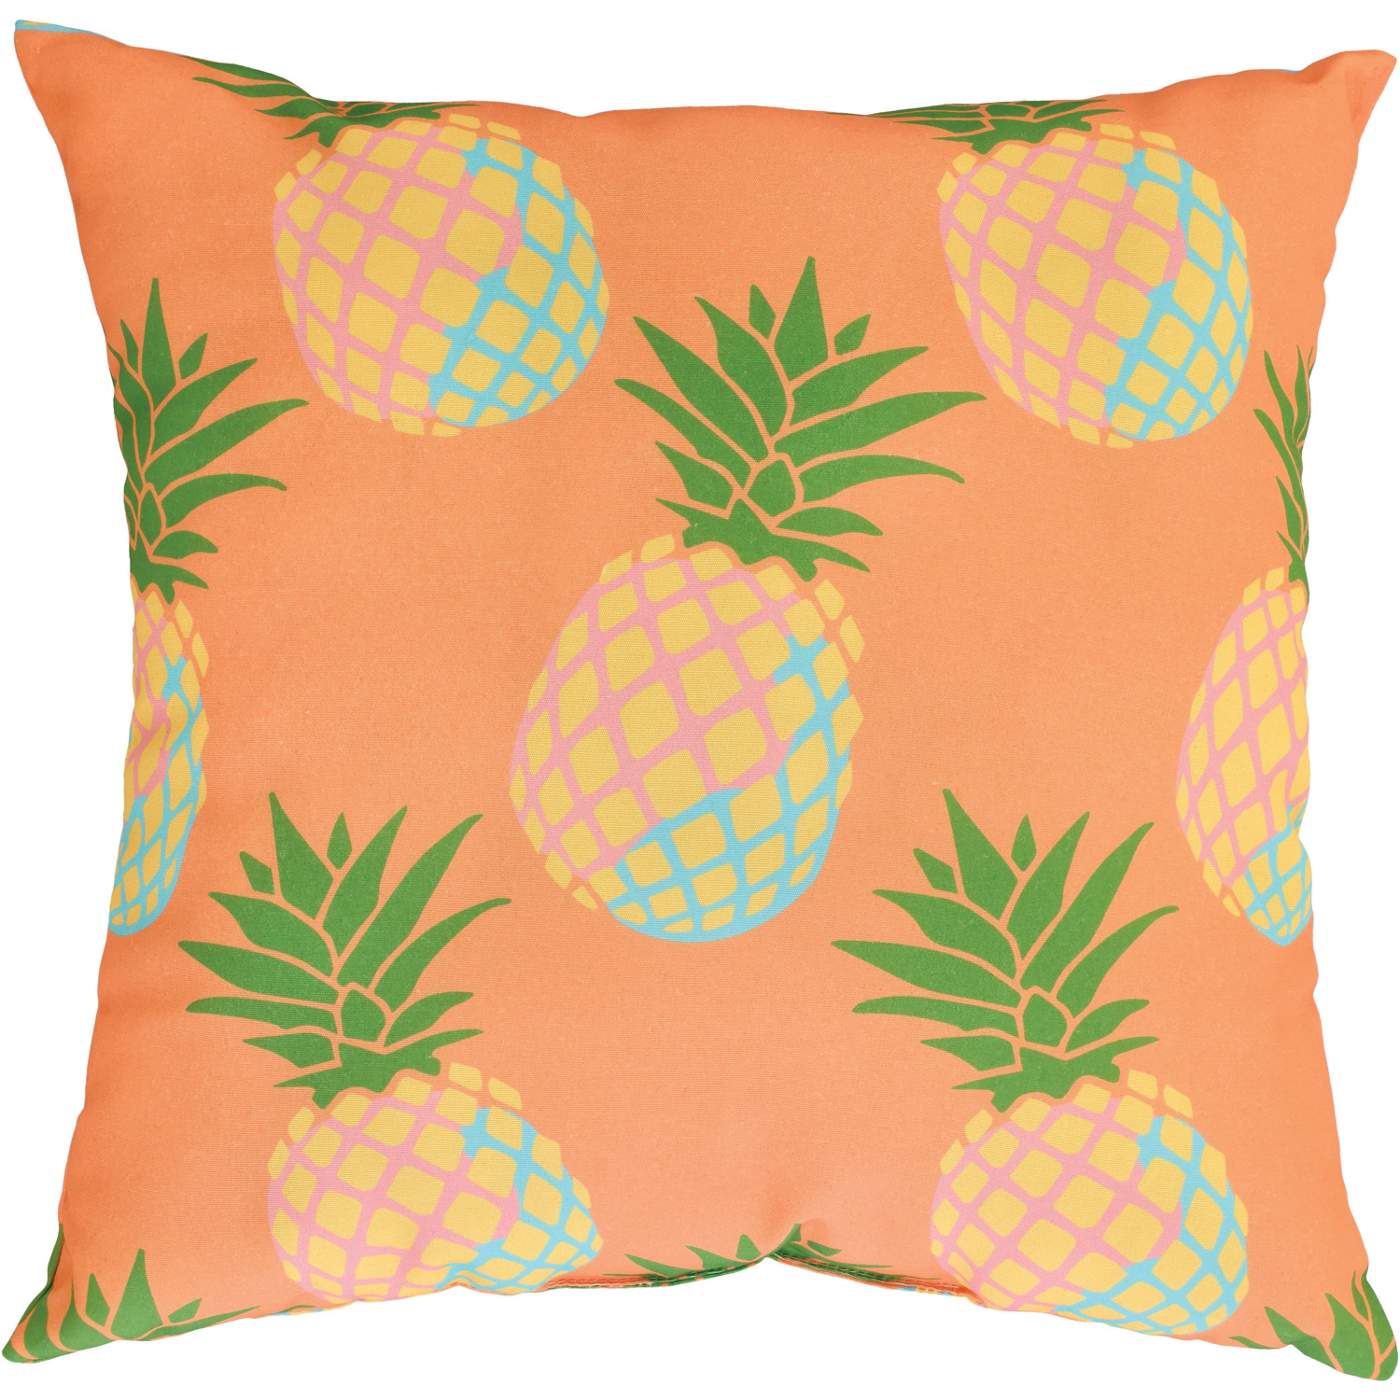 Destination Holiday Pineapples Outdoor Throw Pillow; image 1 of 2